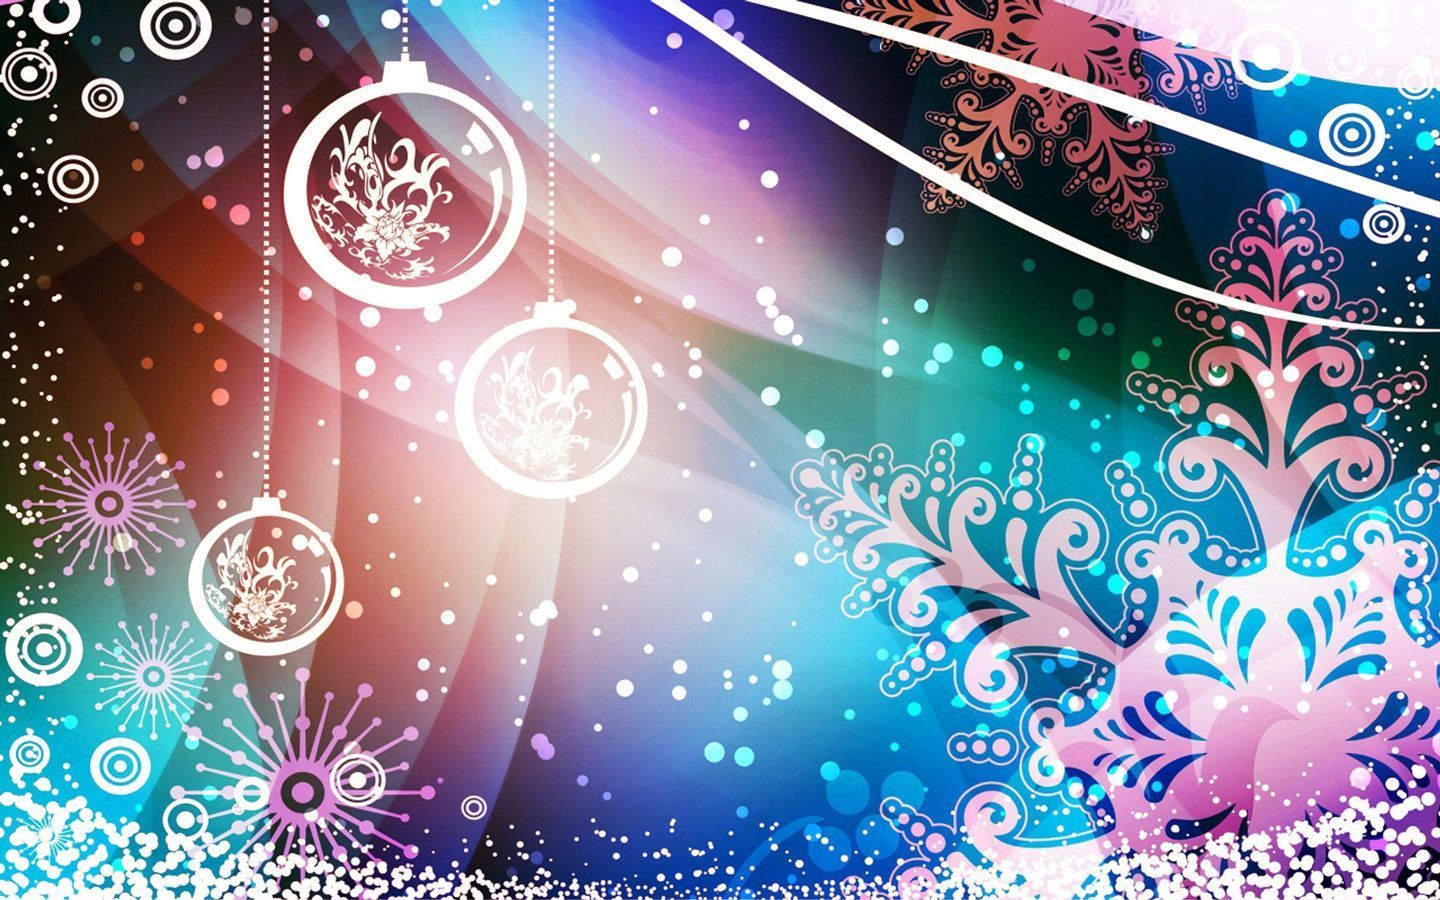 2015 Christmas computer wallpaper - images, pics, photos, pictures